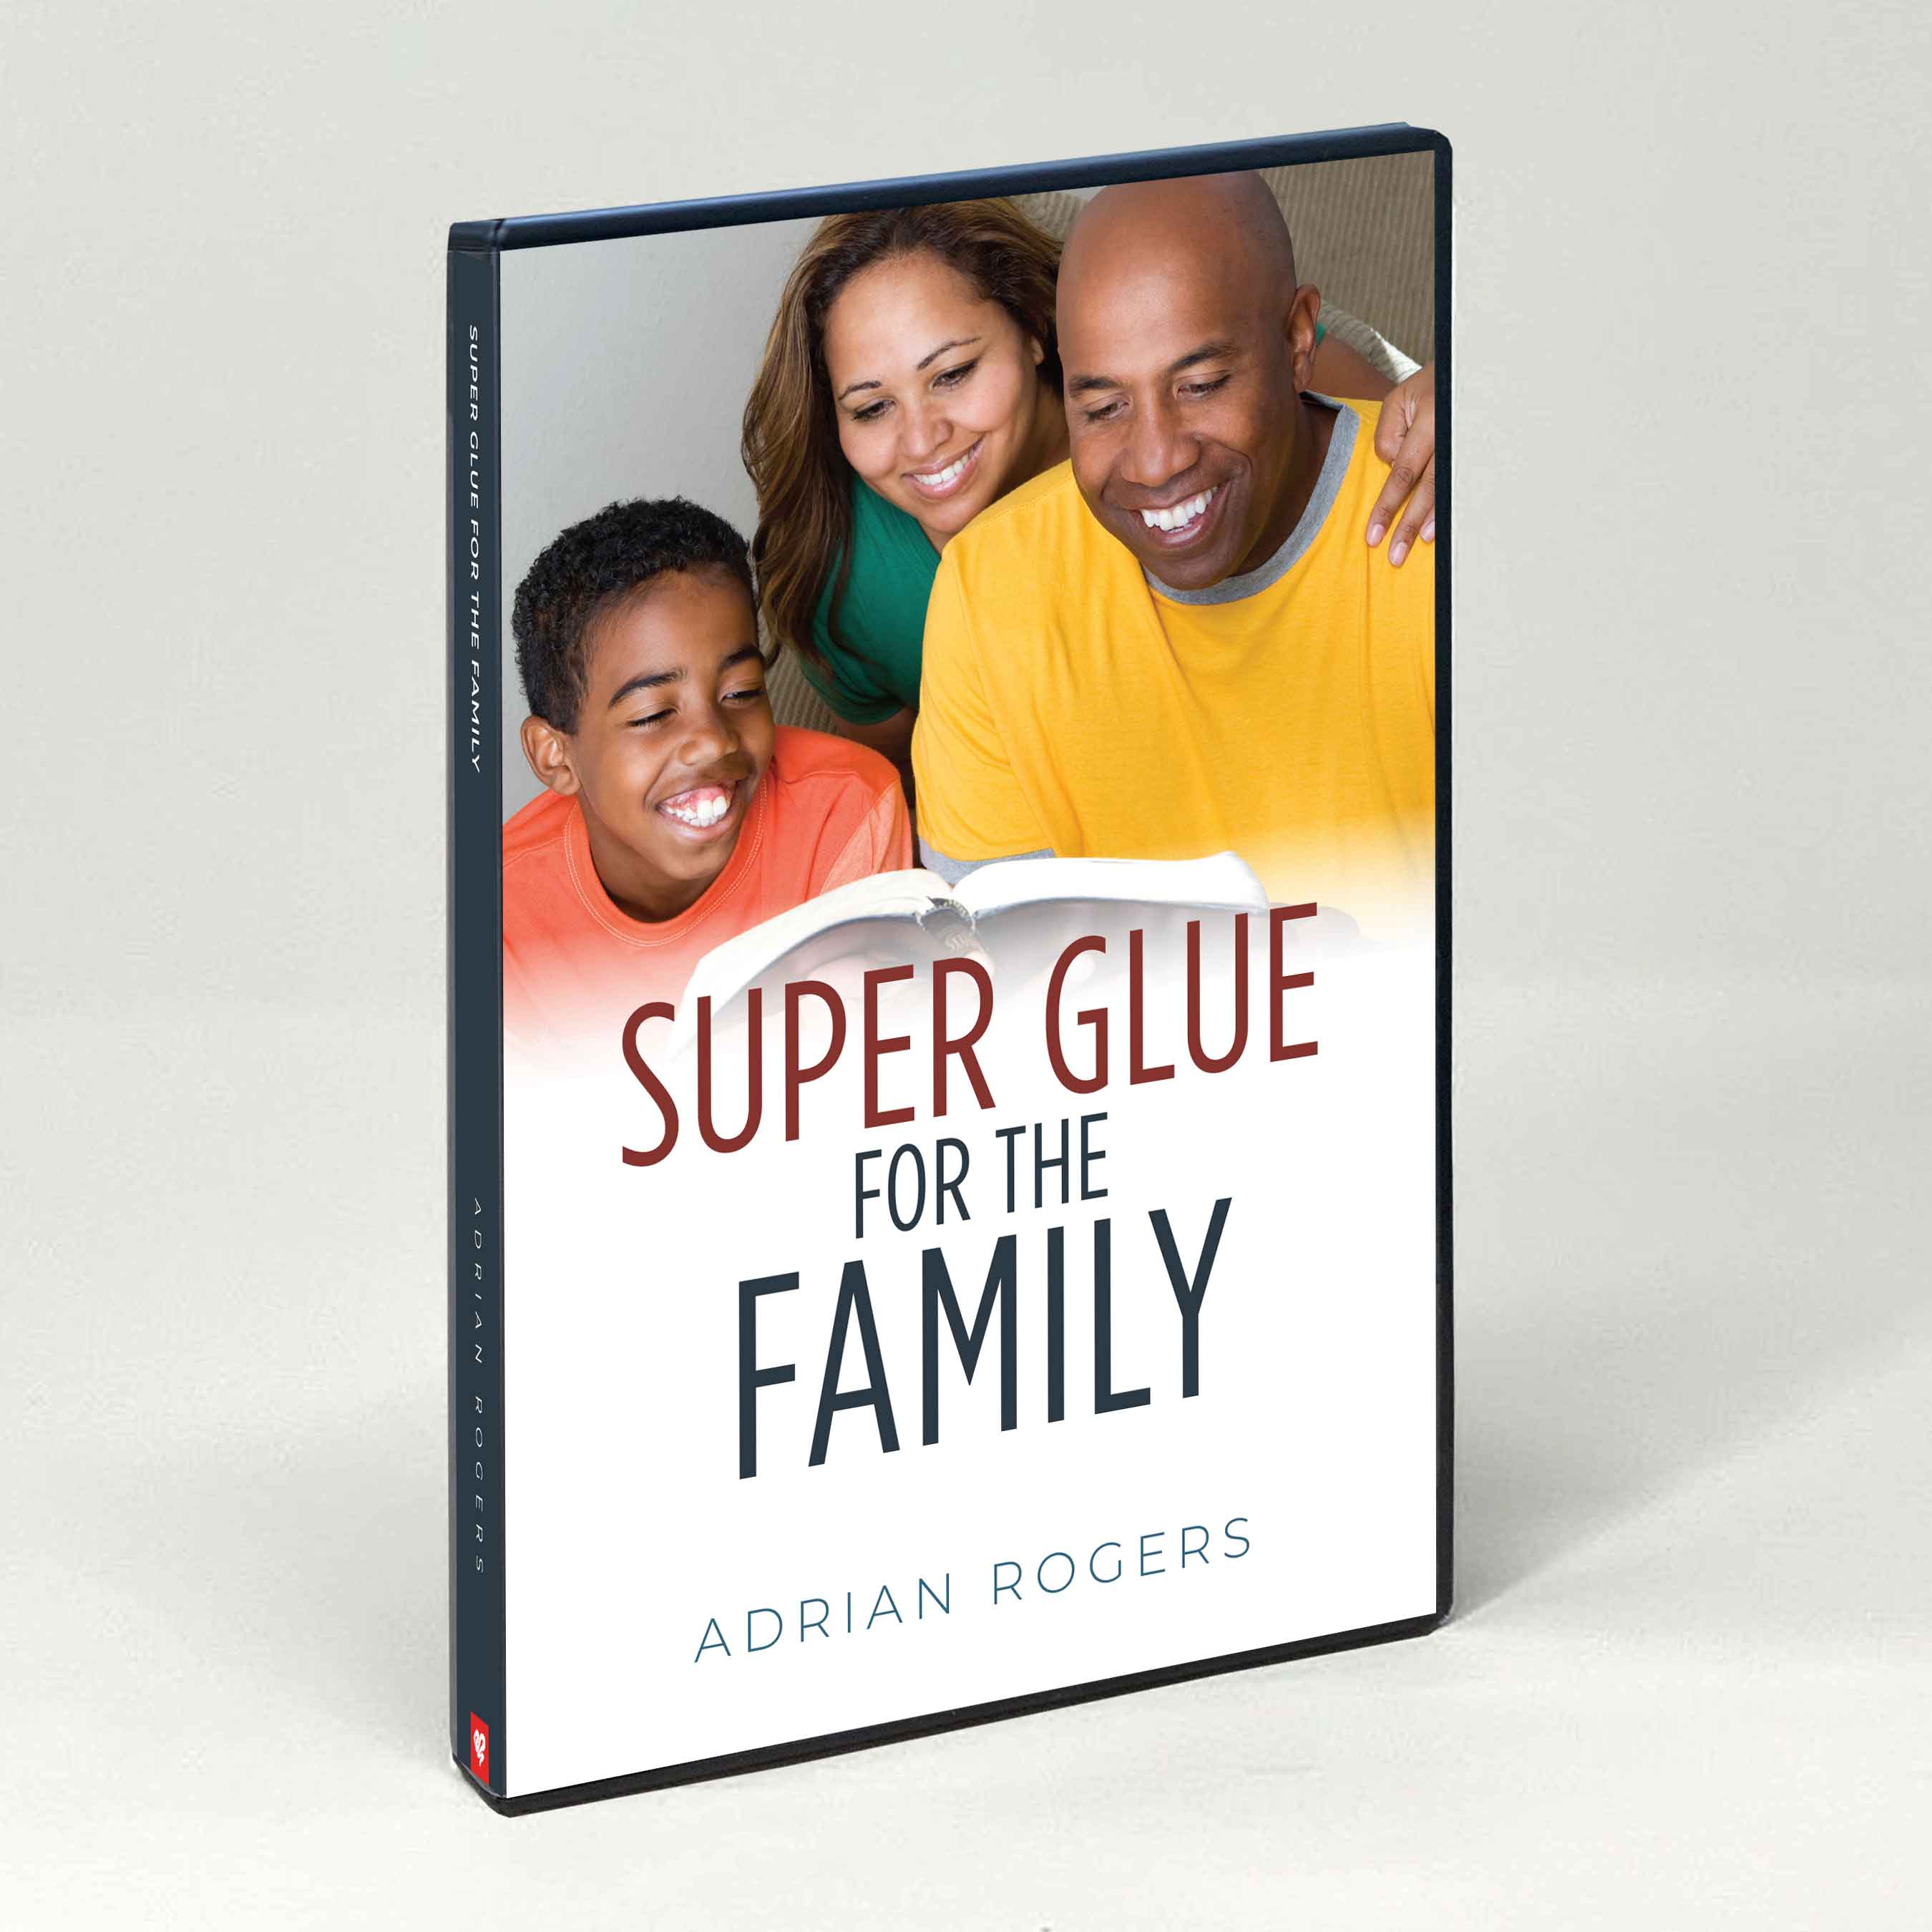 Super Glue for the Family Series